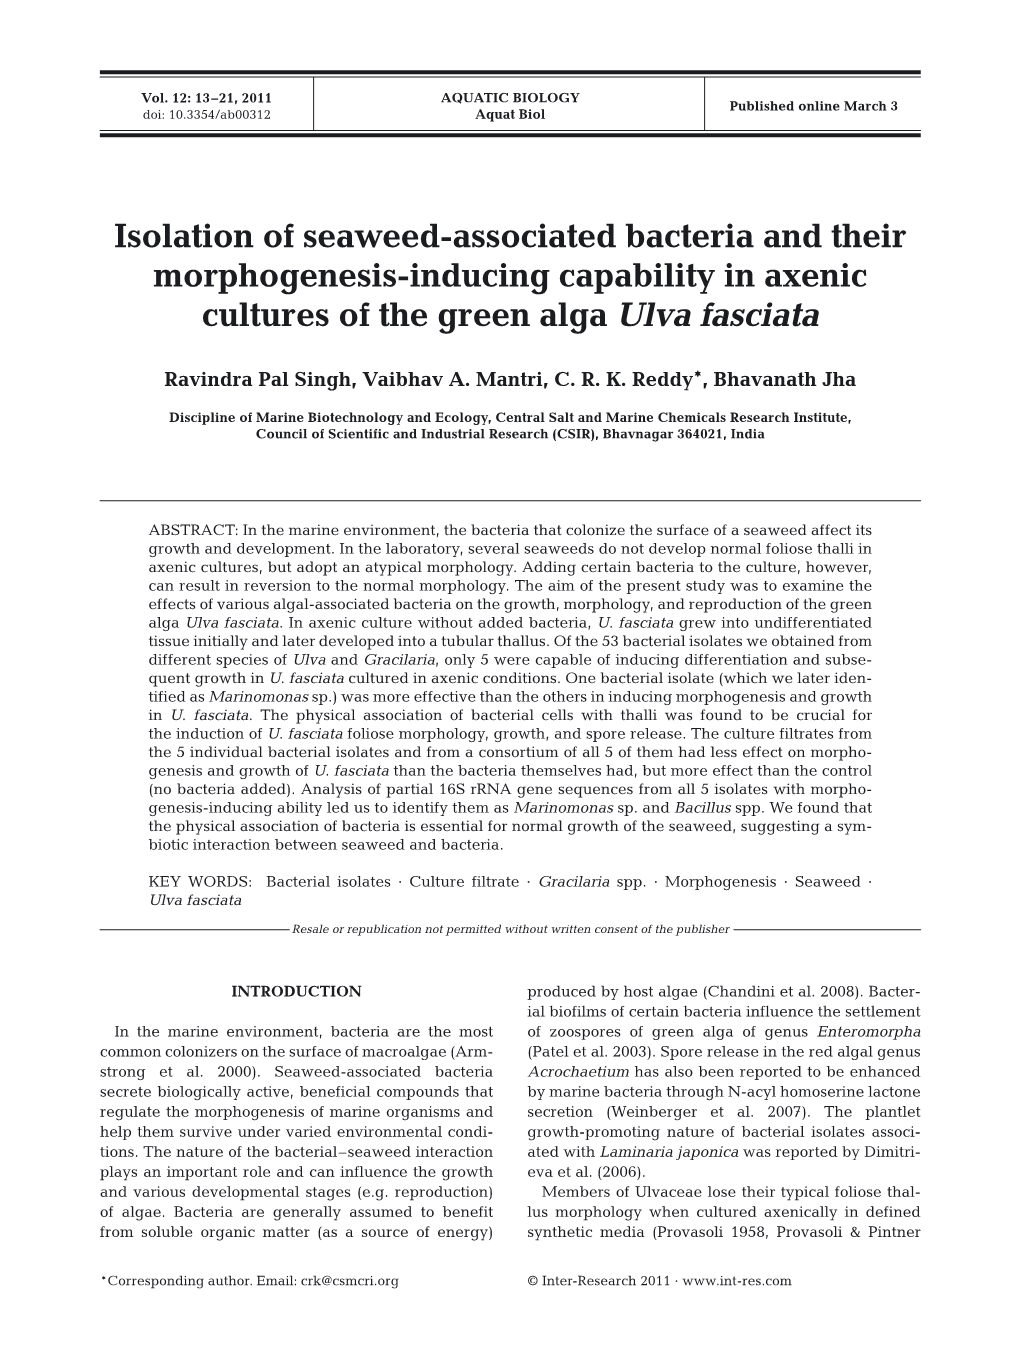 Isolation of Seaweed-Associated Bacteria and Their Morphogenesis-Inducing Capability in Axenic Cultures of the Green Alga Ulva Fasciata